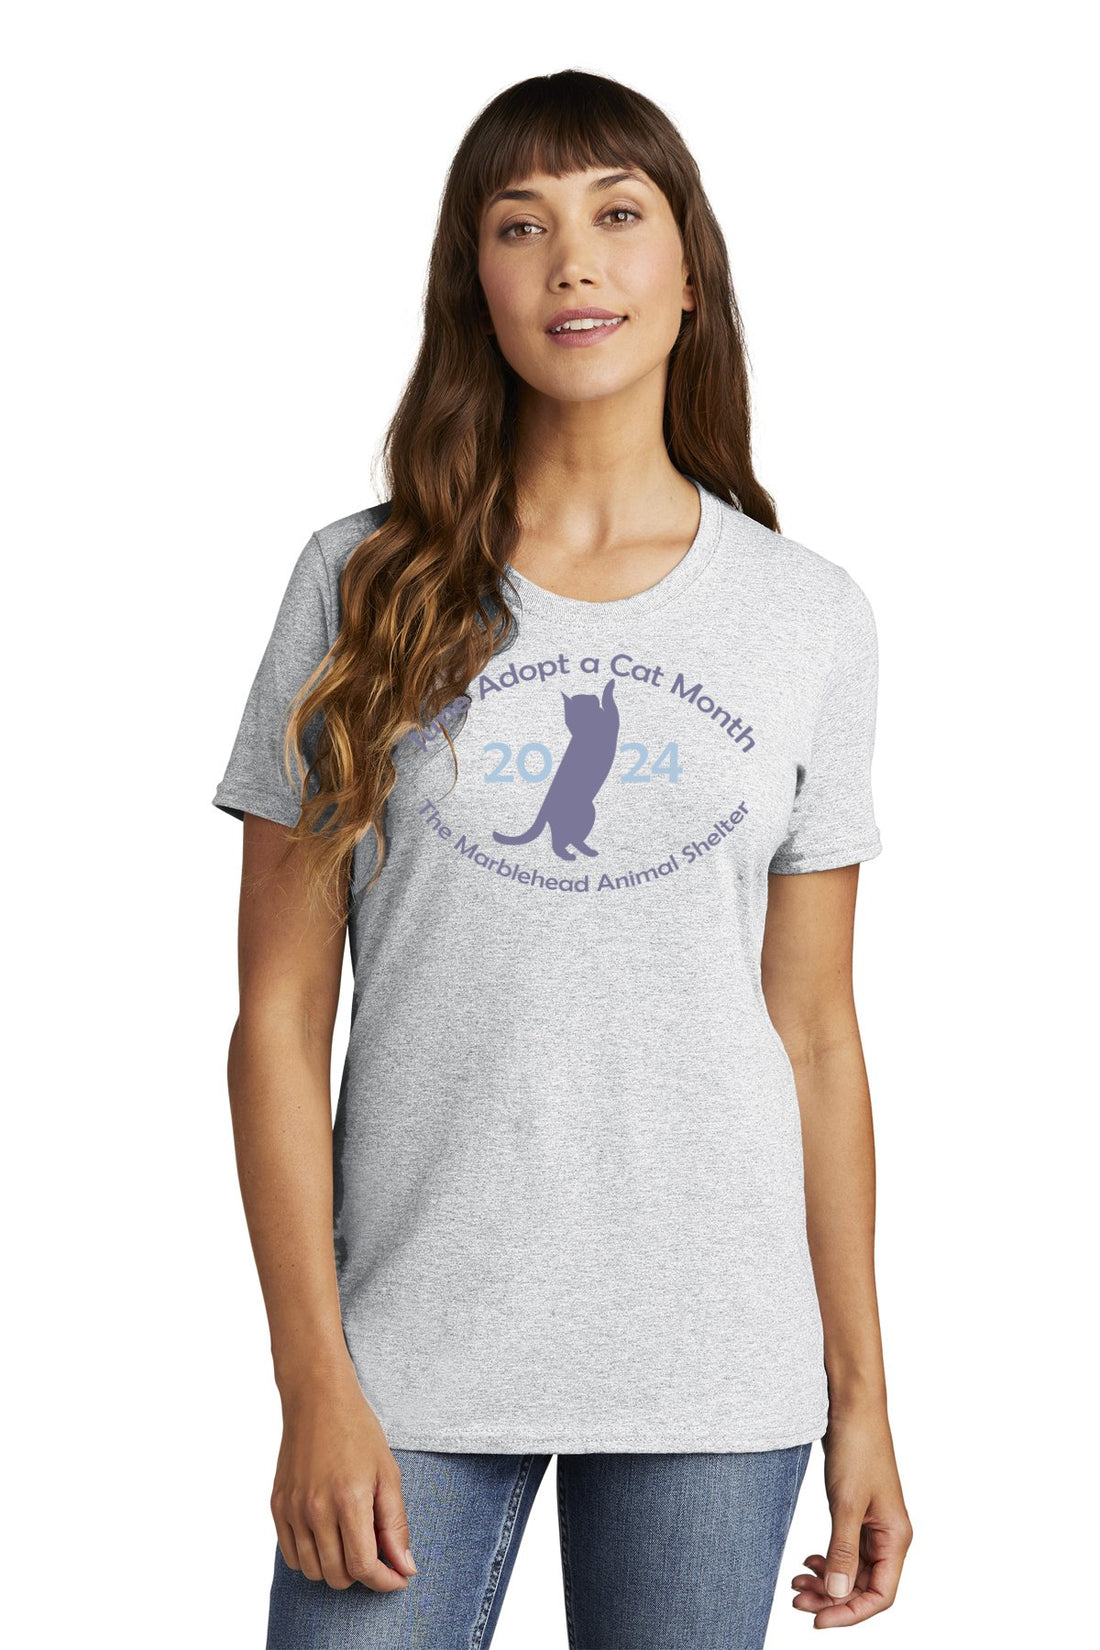 Animal Shelter Adopt-A-Cat Month Ladies Relaxed Tee